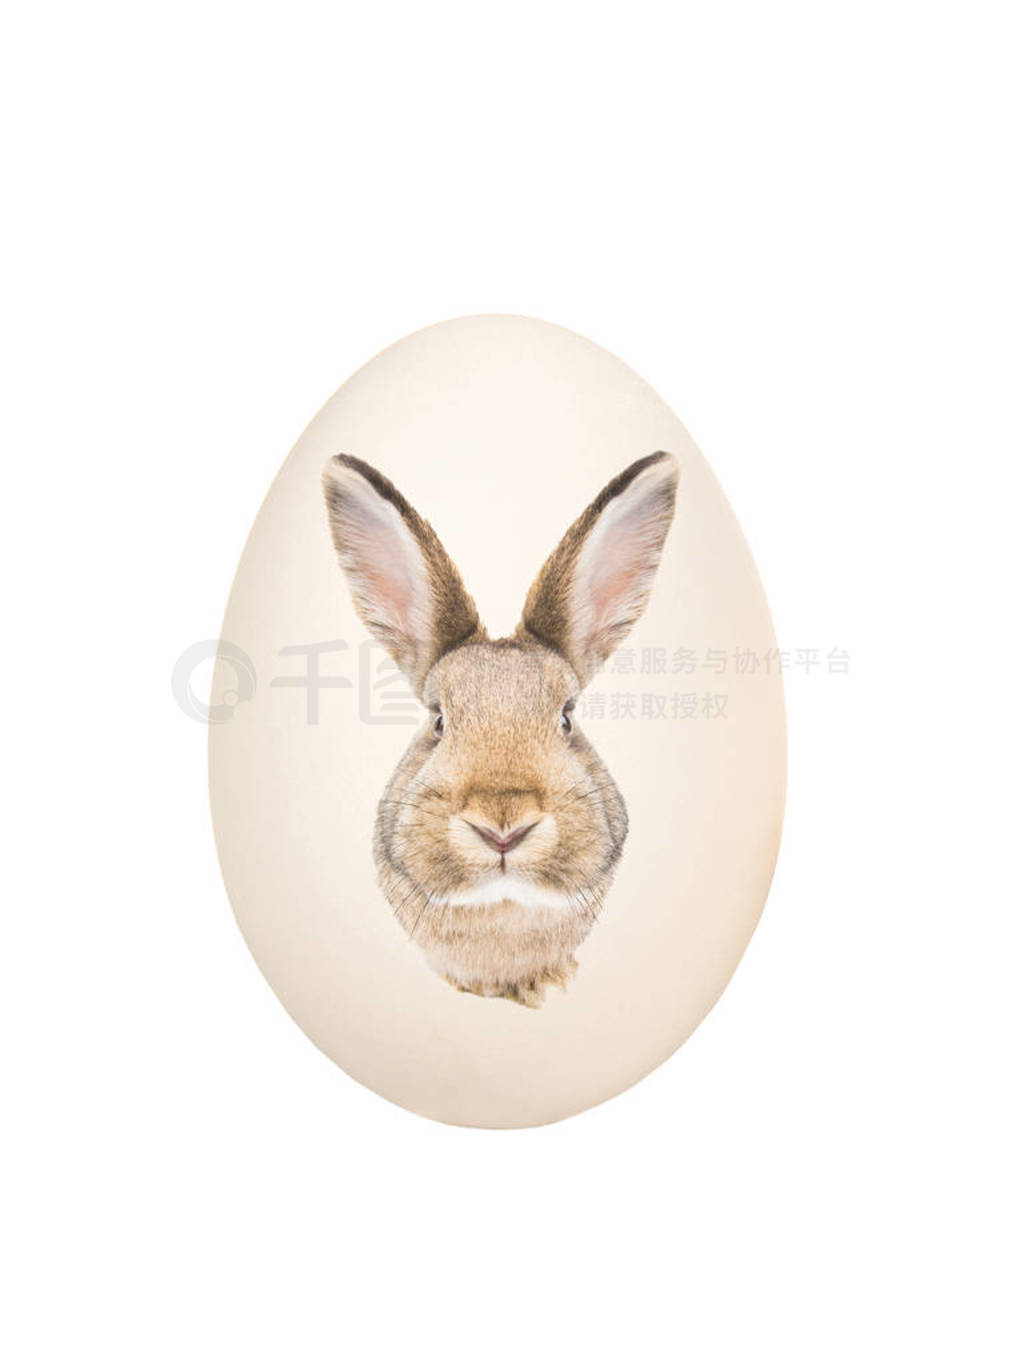 Easter egg with the image of a brown rabbit isolated on a white